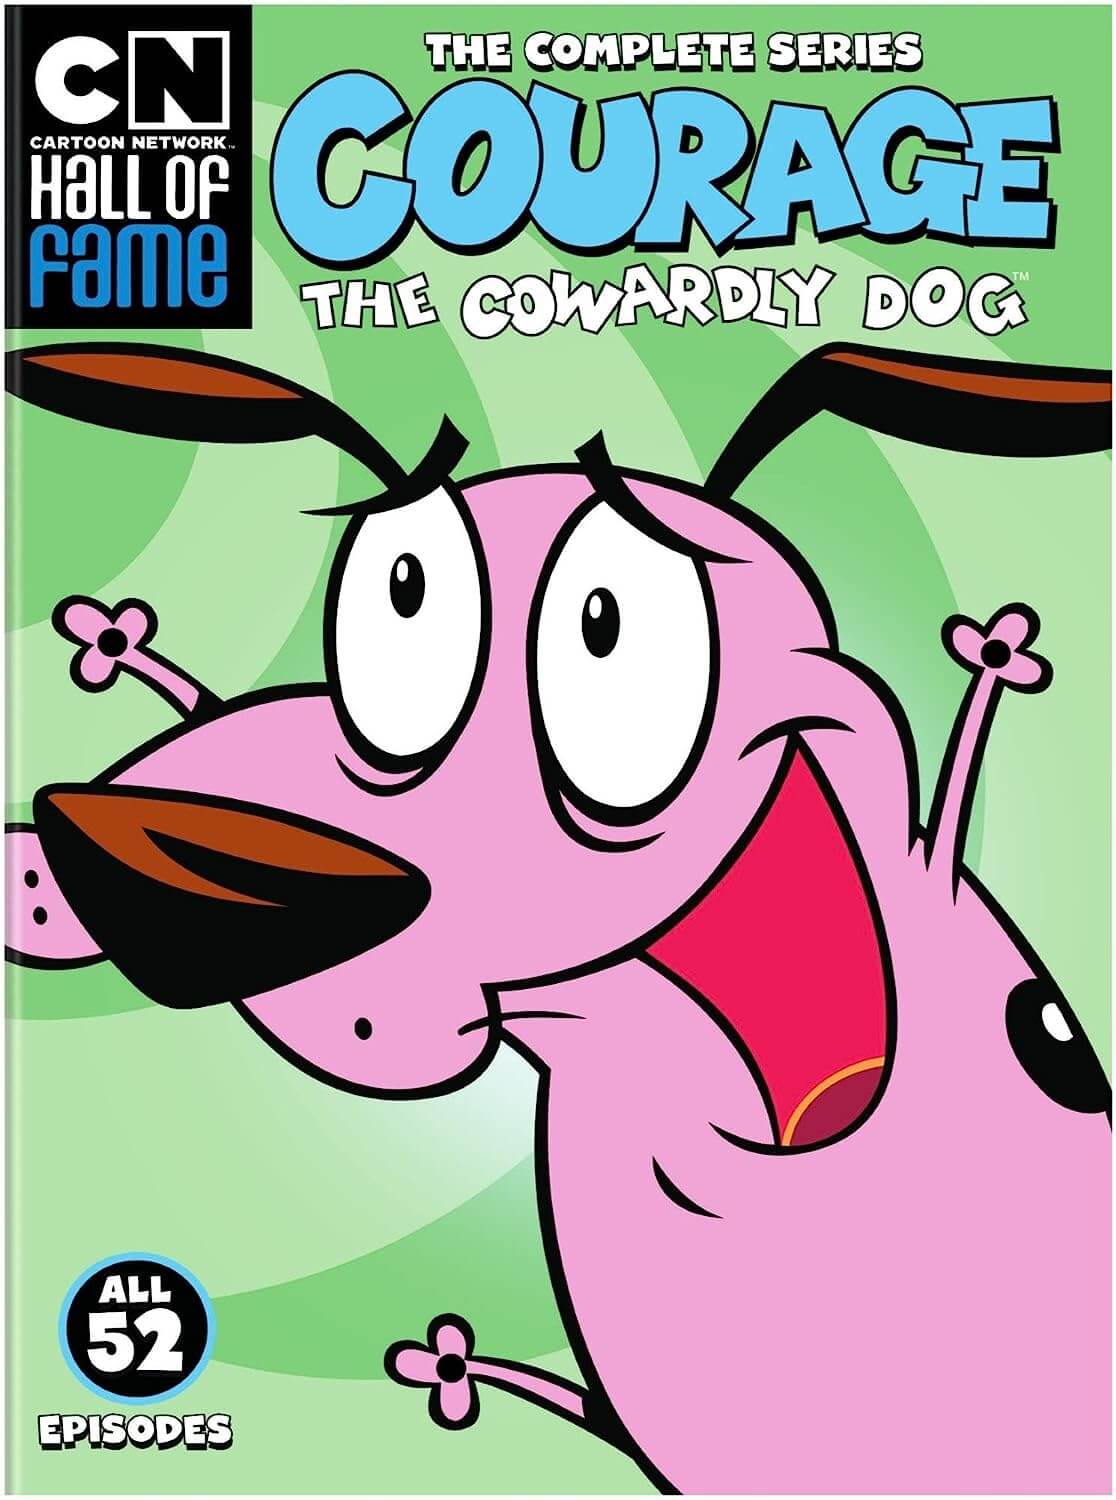 "Courage The Cowardly Dog"